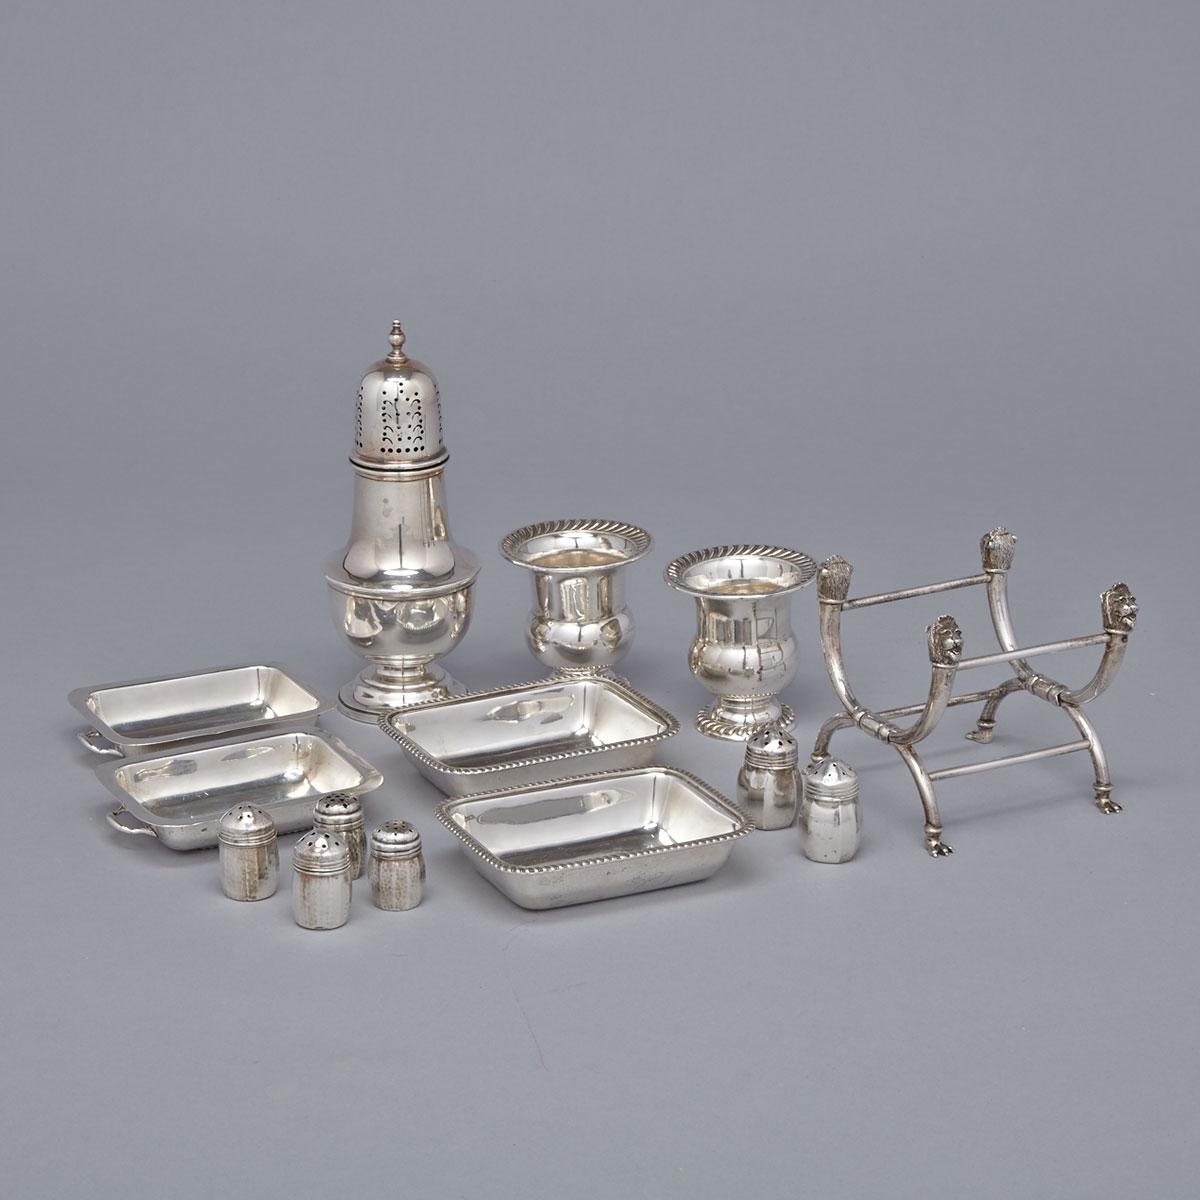 Group of Small Silver Articles, 20th century